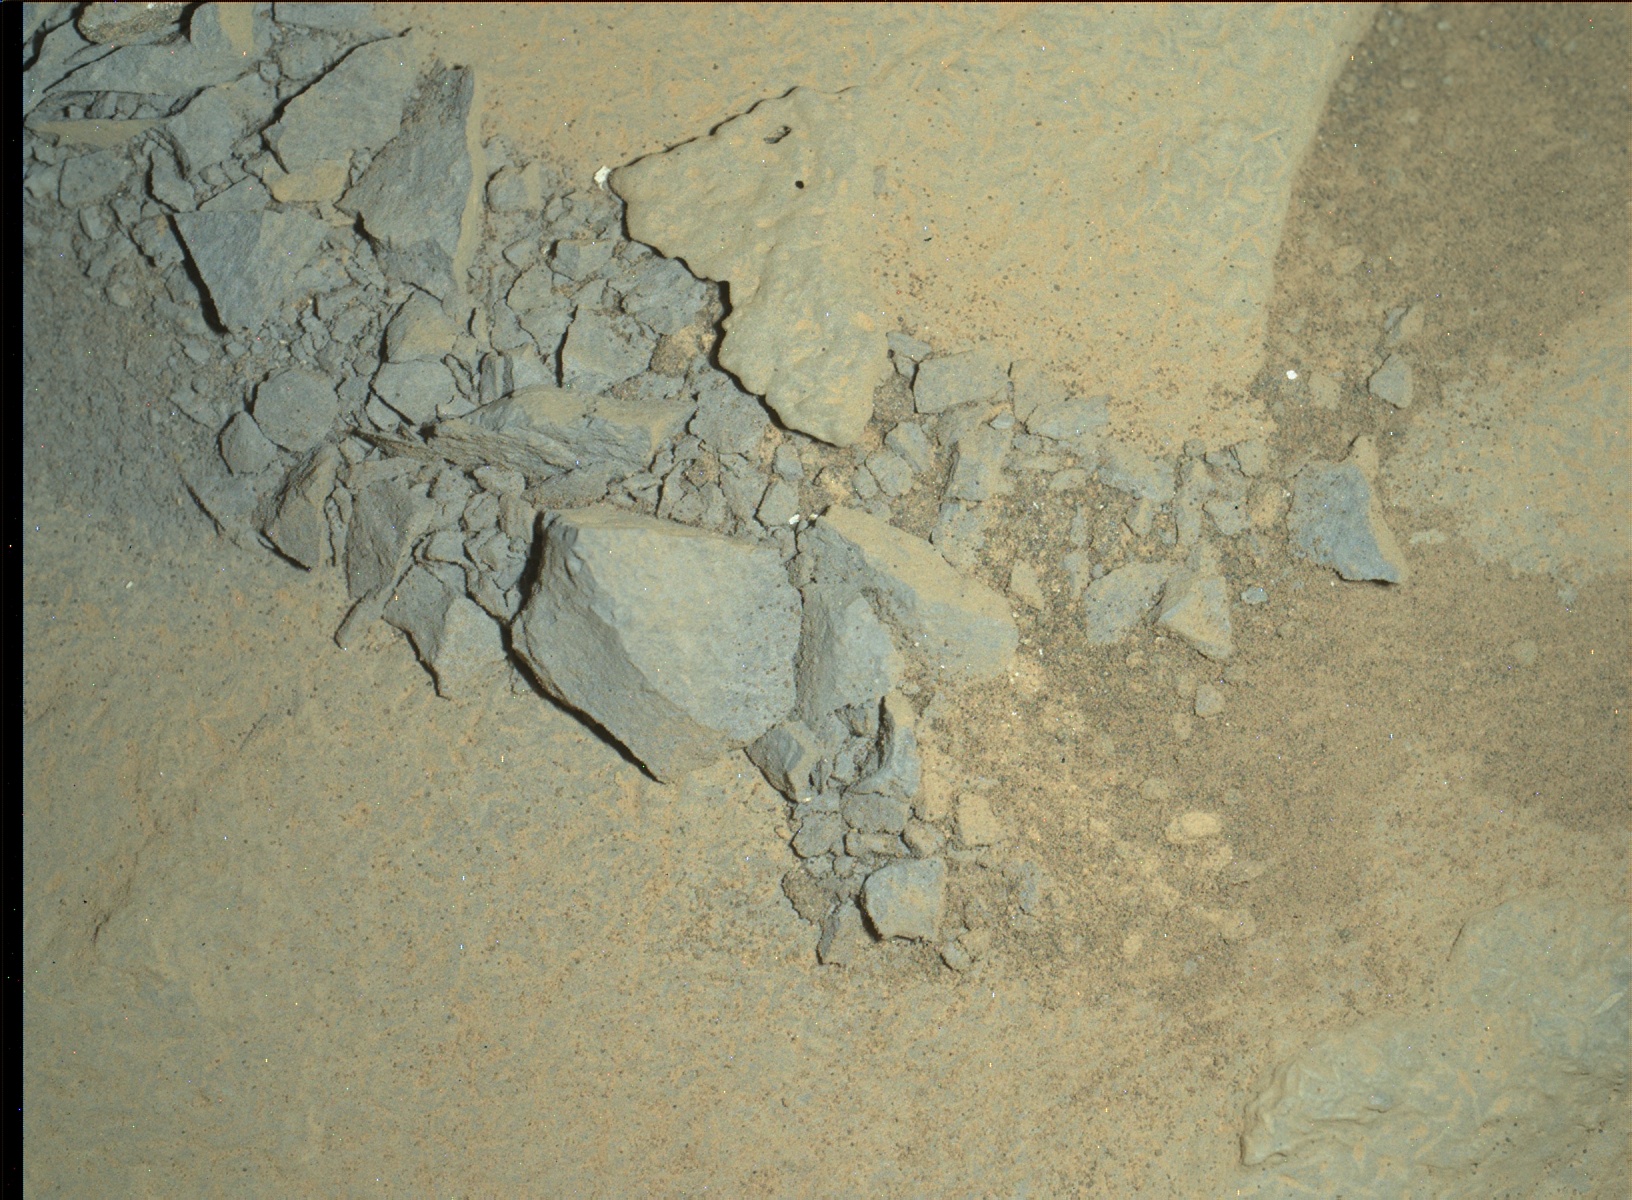 Nasa's Mars rover Curiosity acquired this image using its Mars Hand Lens Imager (MAHLI) on Sol 869